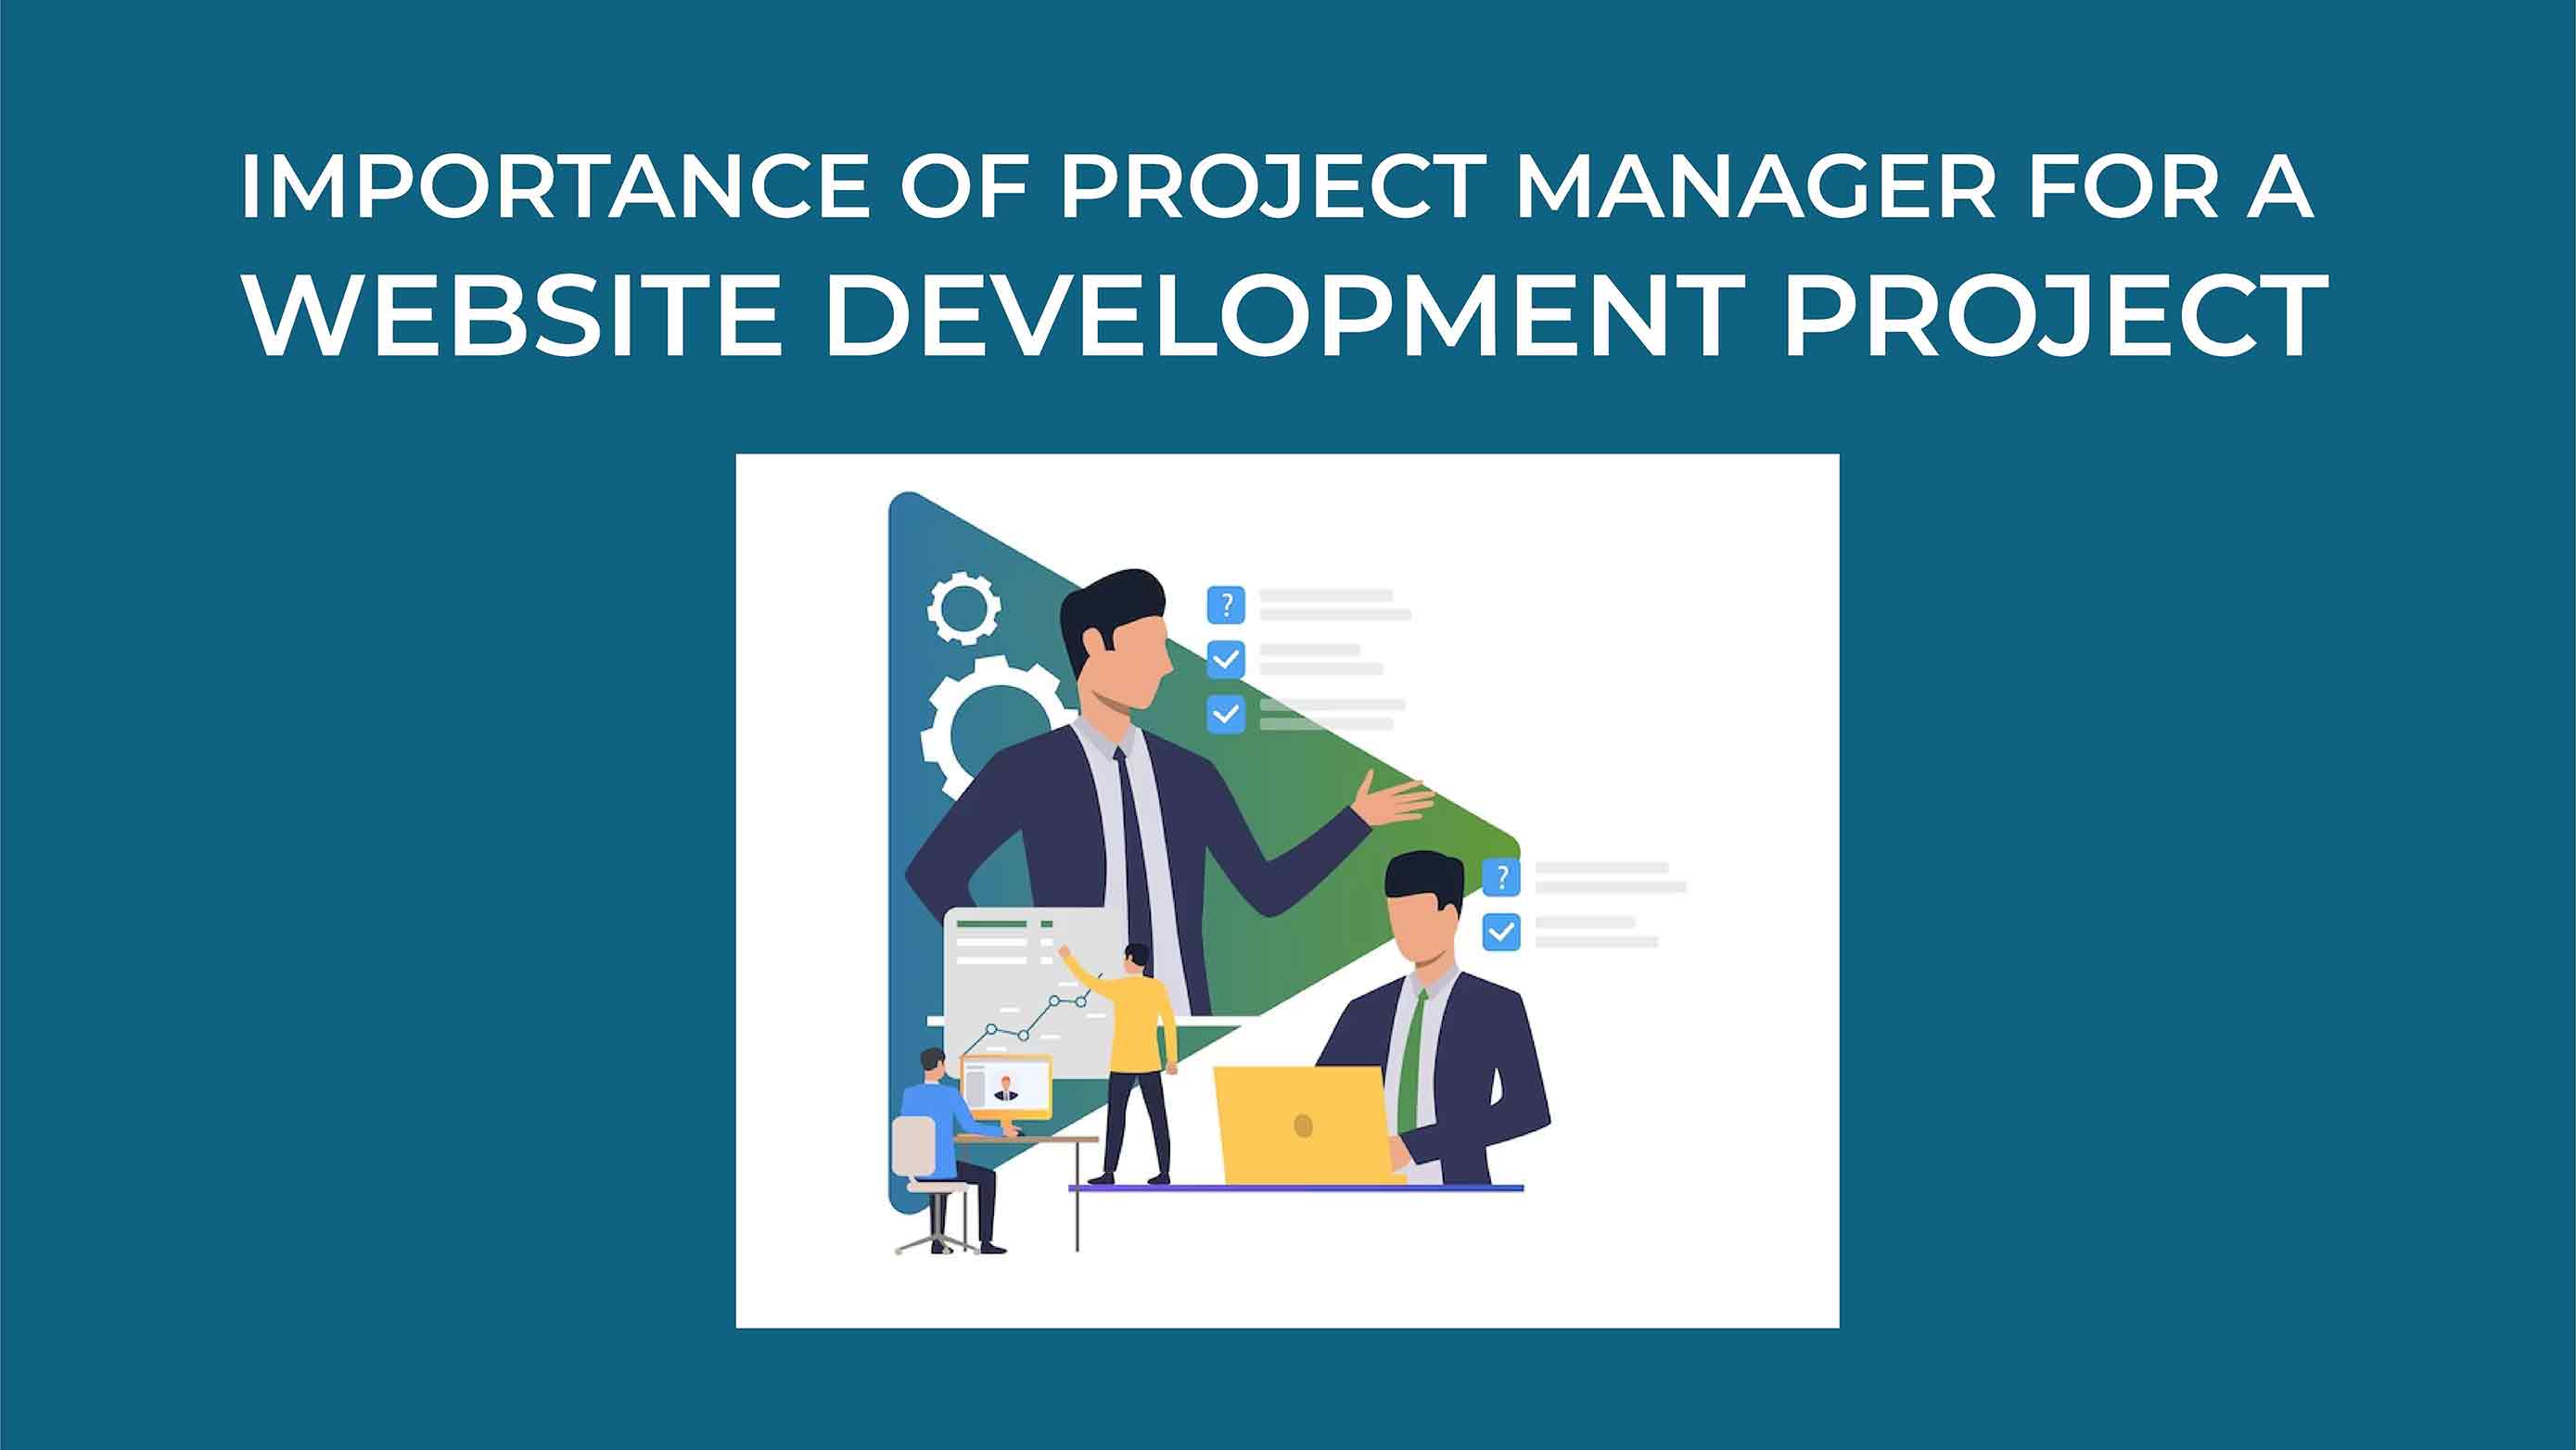 Importance of project manager for a website development project